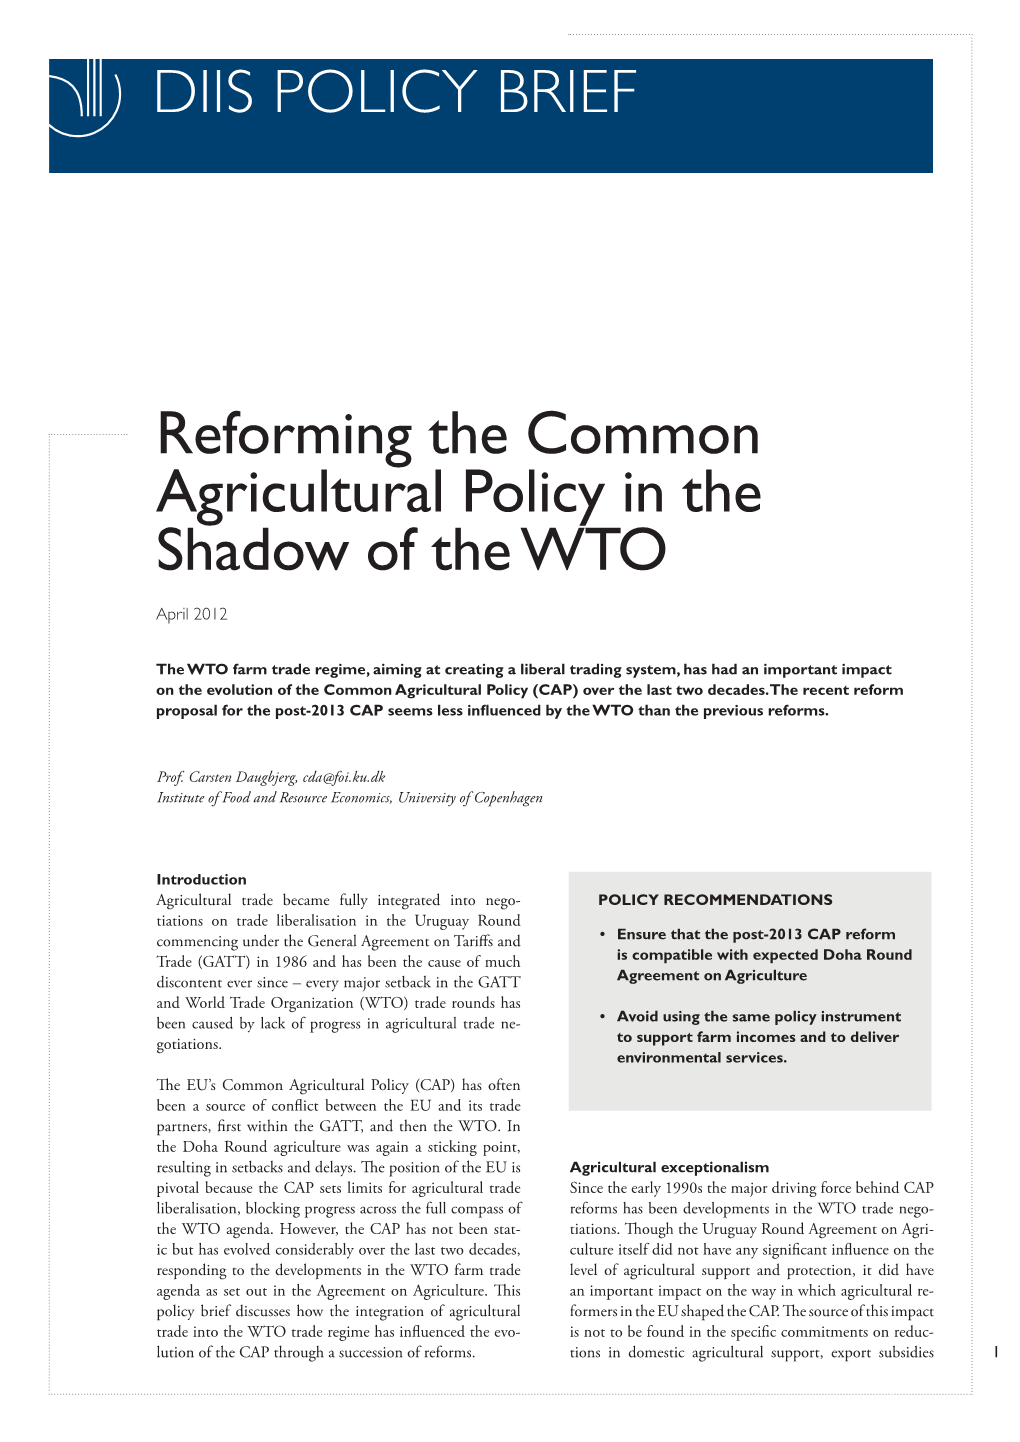 Reforming the Common Agricultural Policy in the Shadow of the WTO